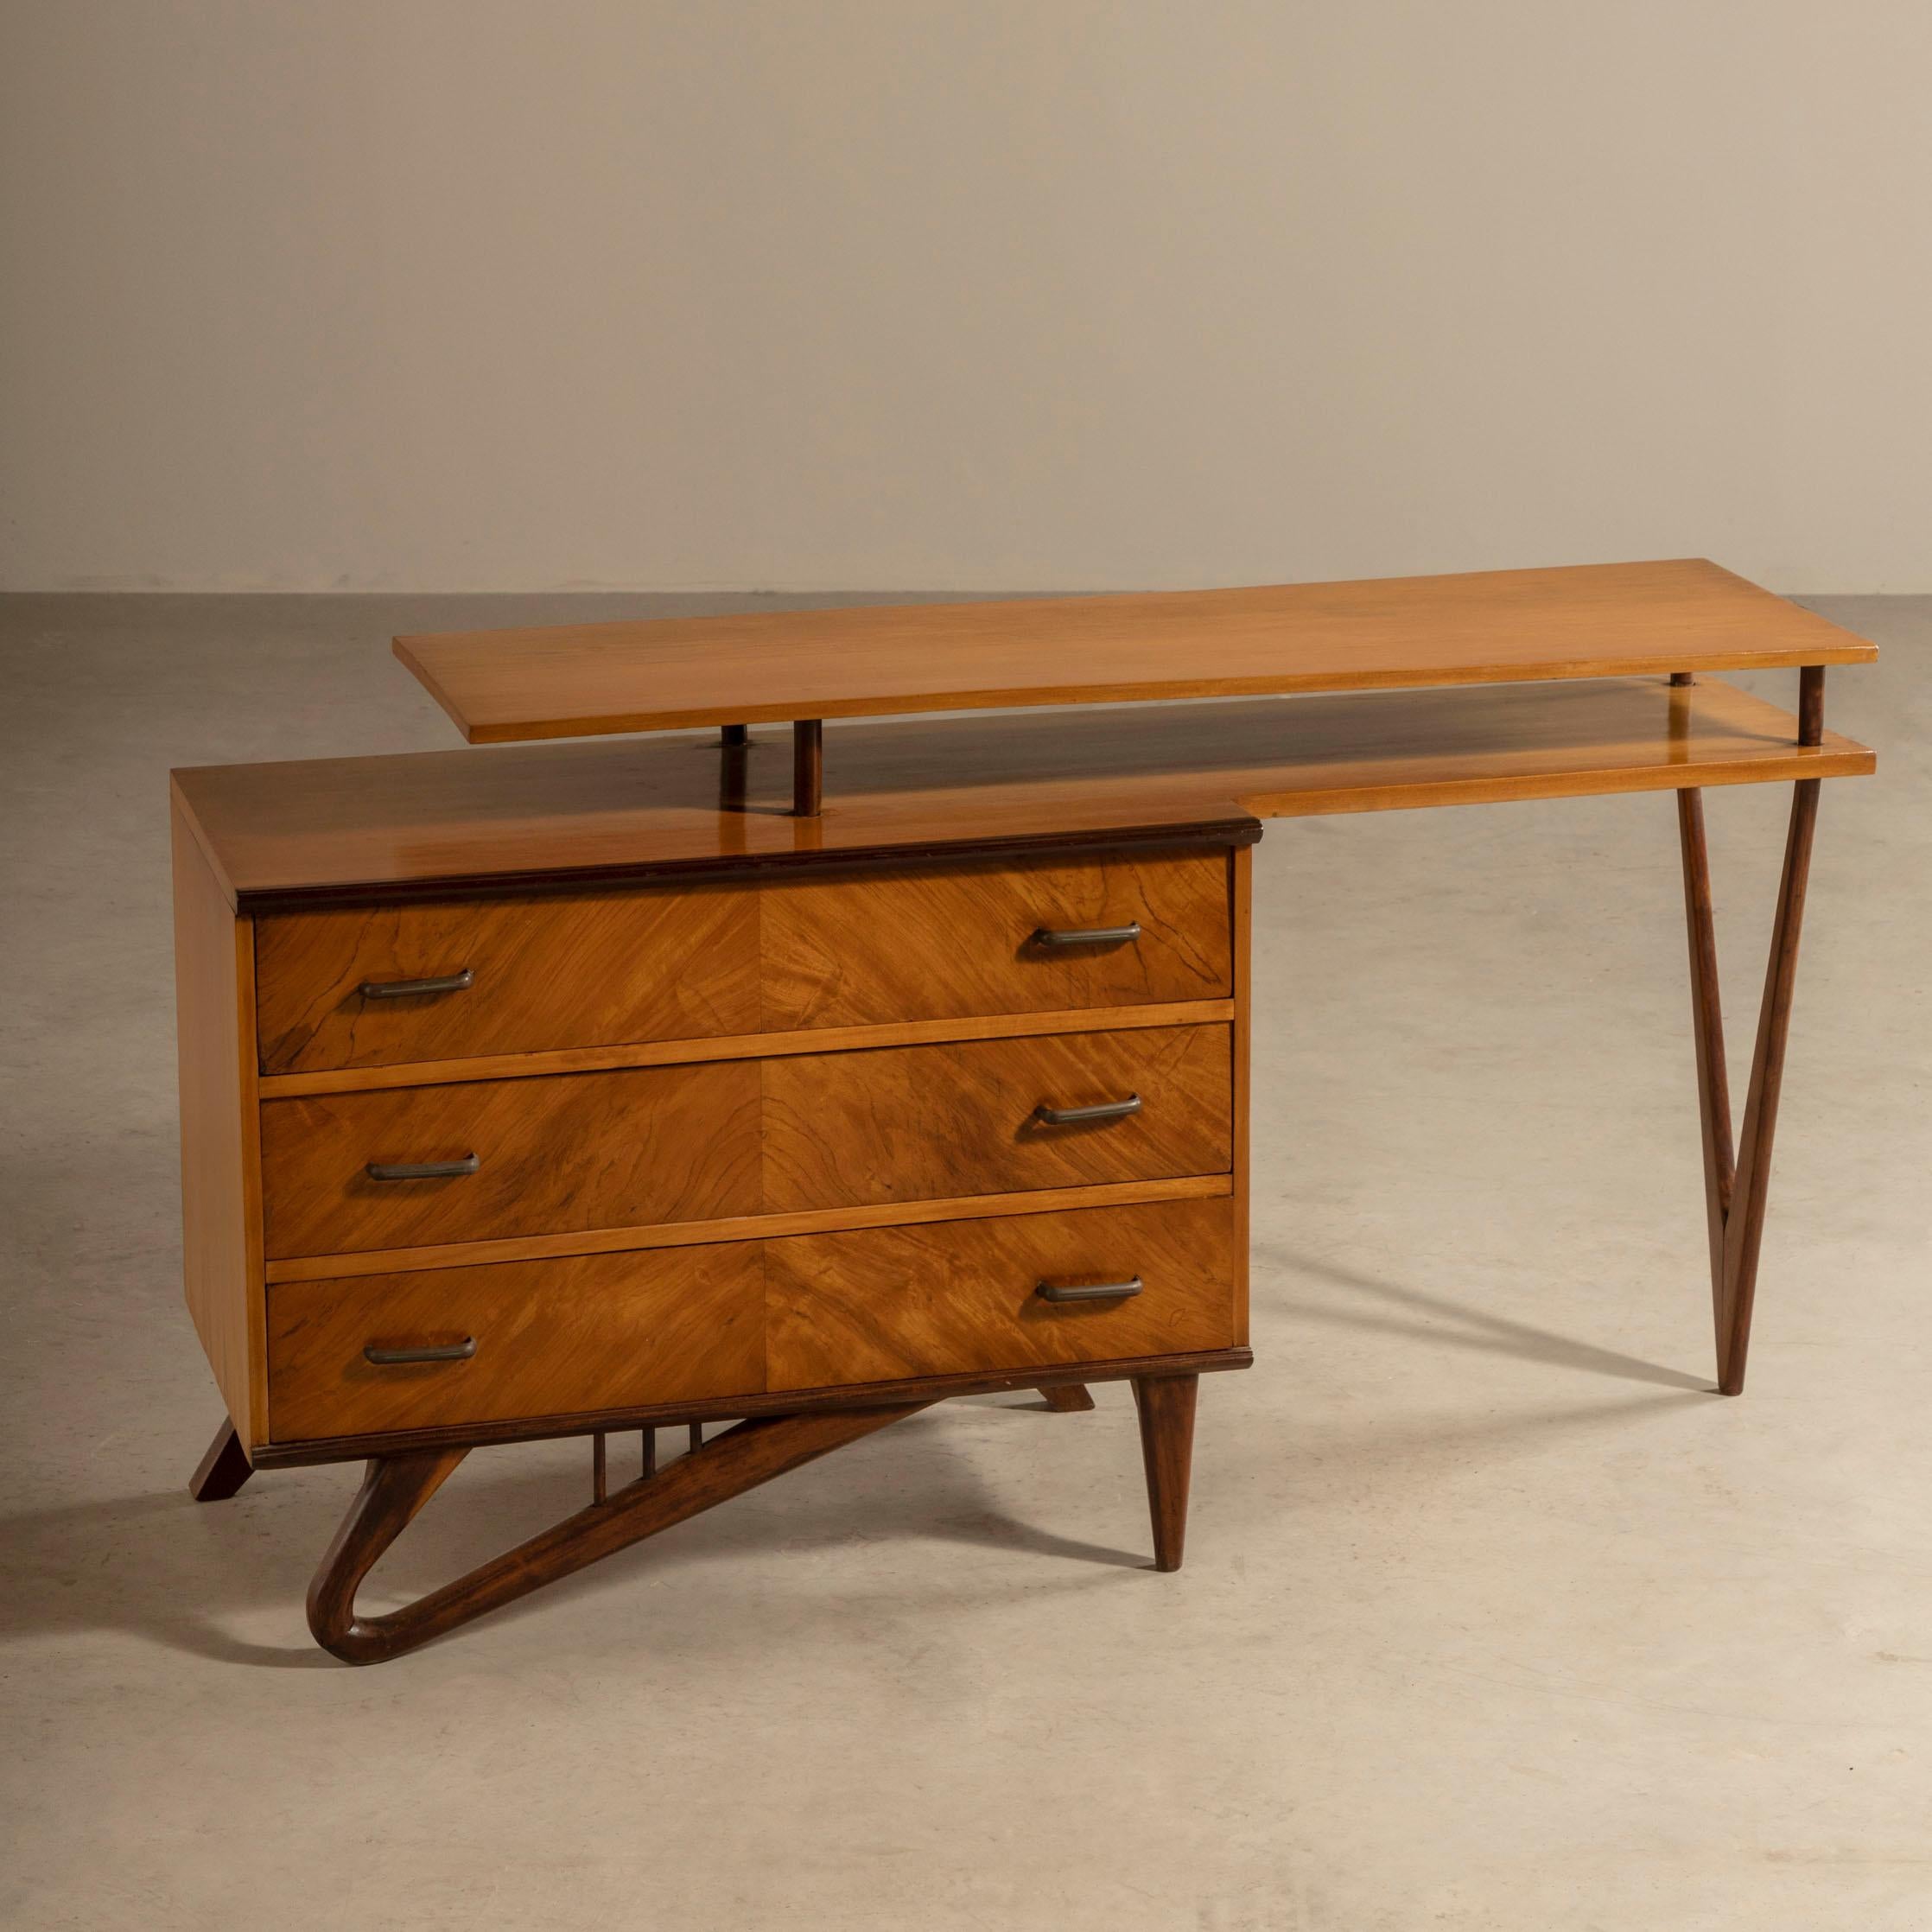 Sculptural Sideboard in Caviúna Wood, Giuseppe Scapinelli, Brazilian Midcentury In Good Condition For Sale In Sao Paulo, SP